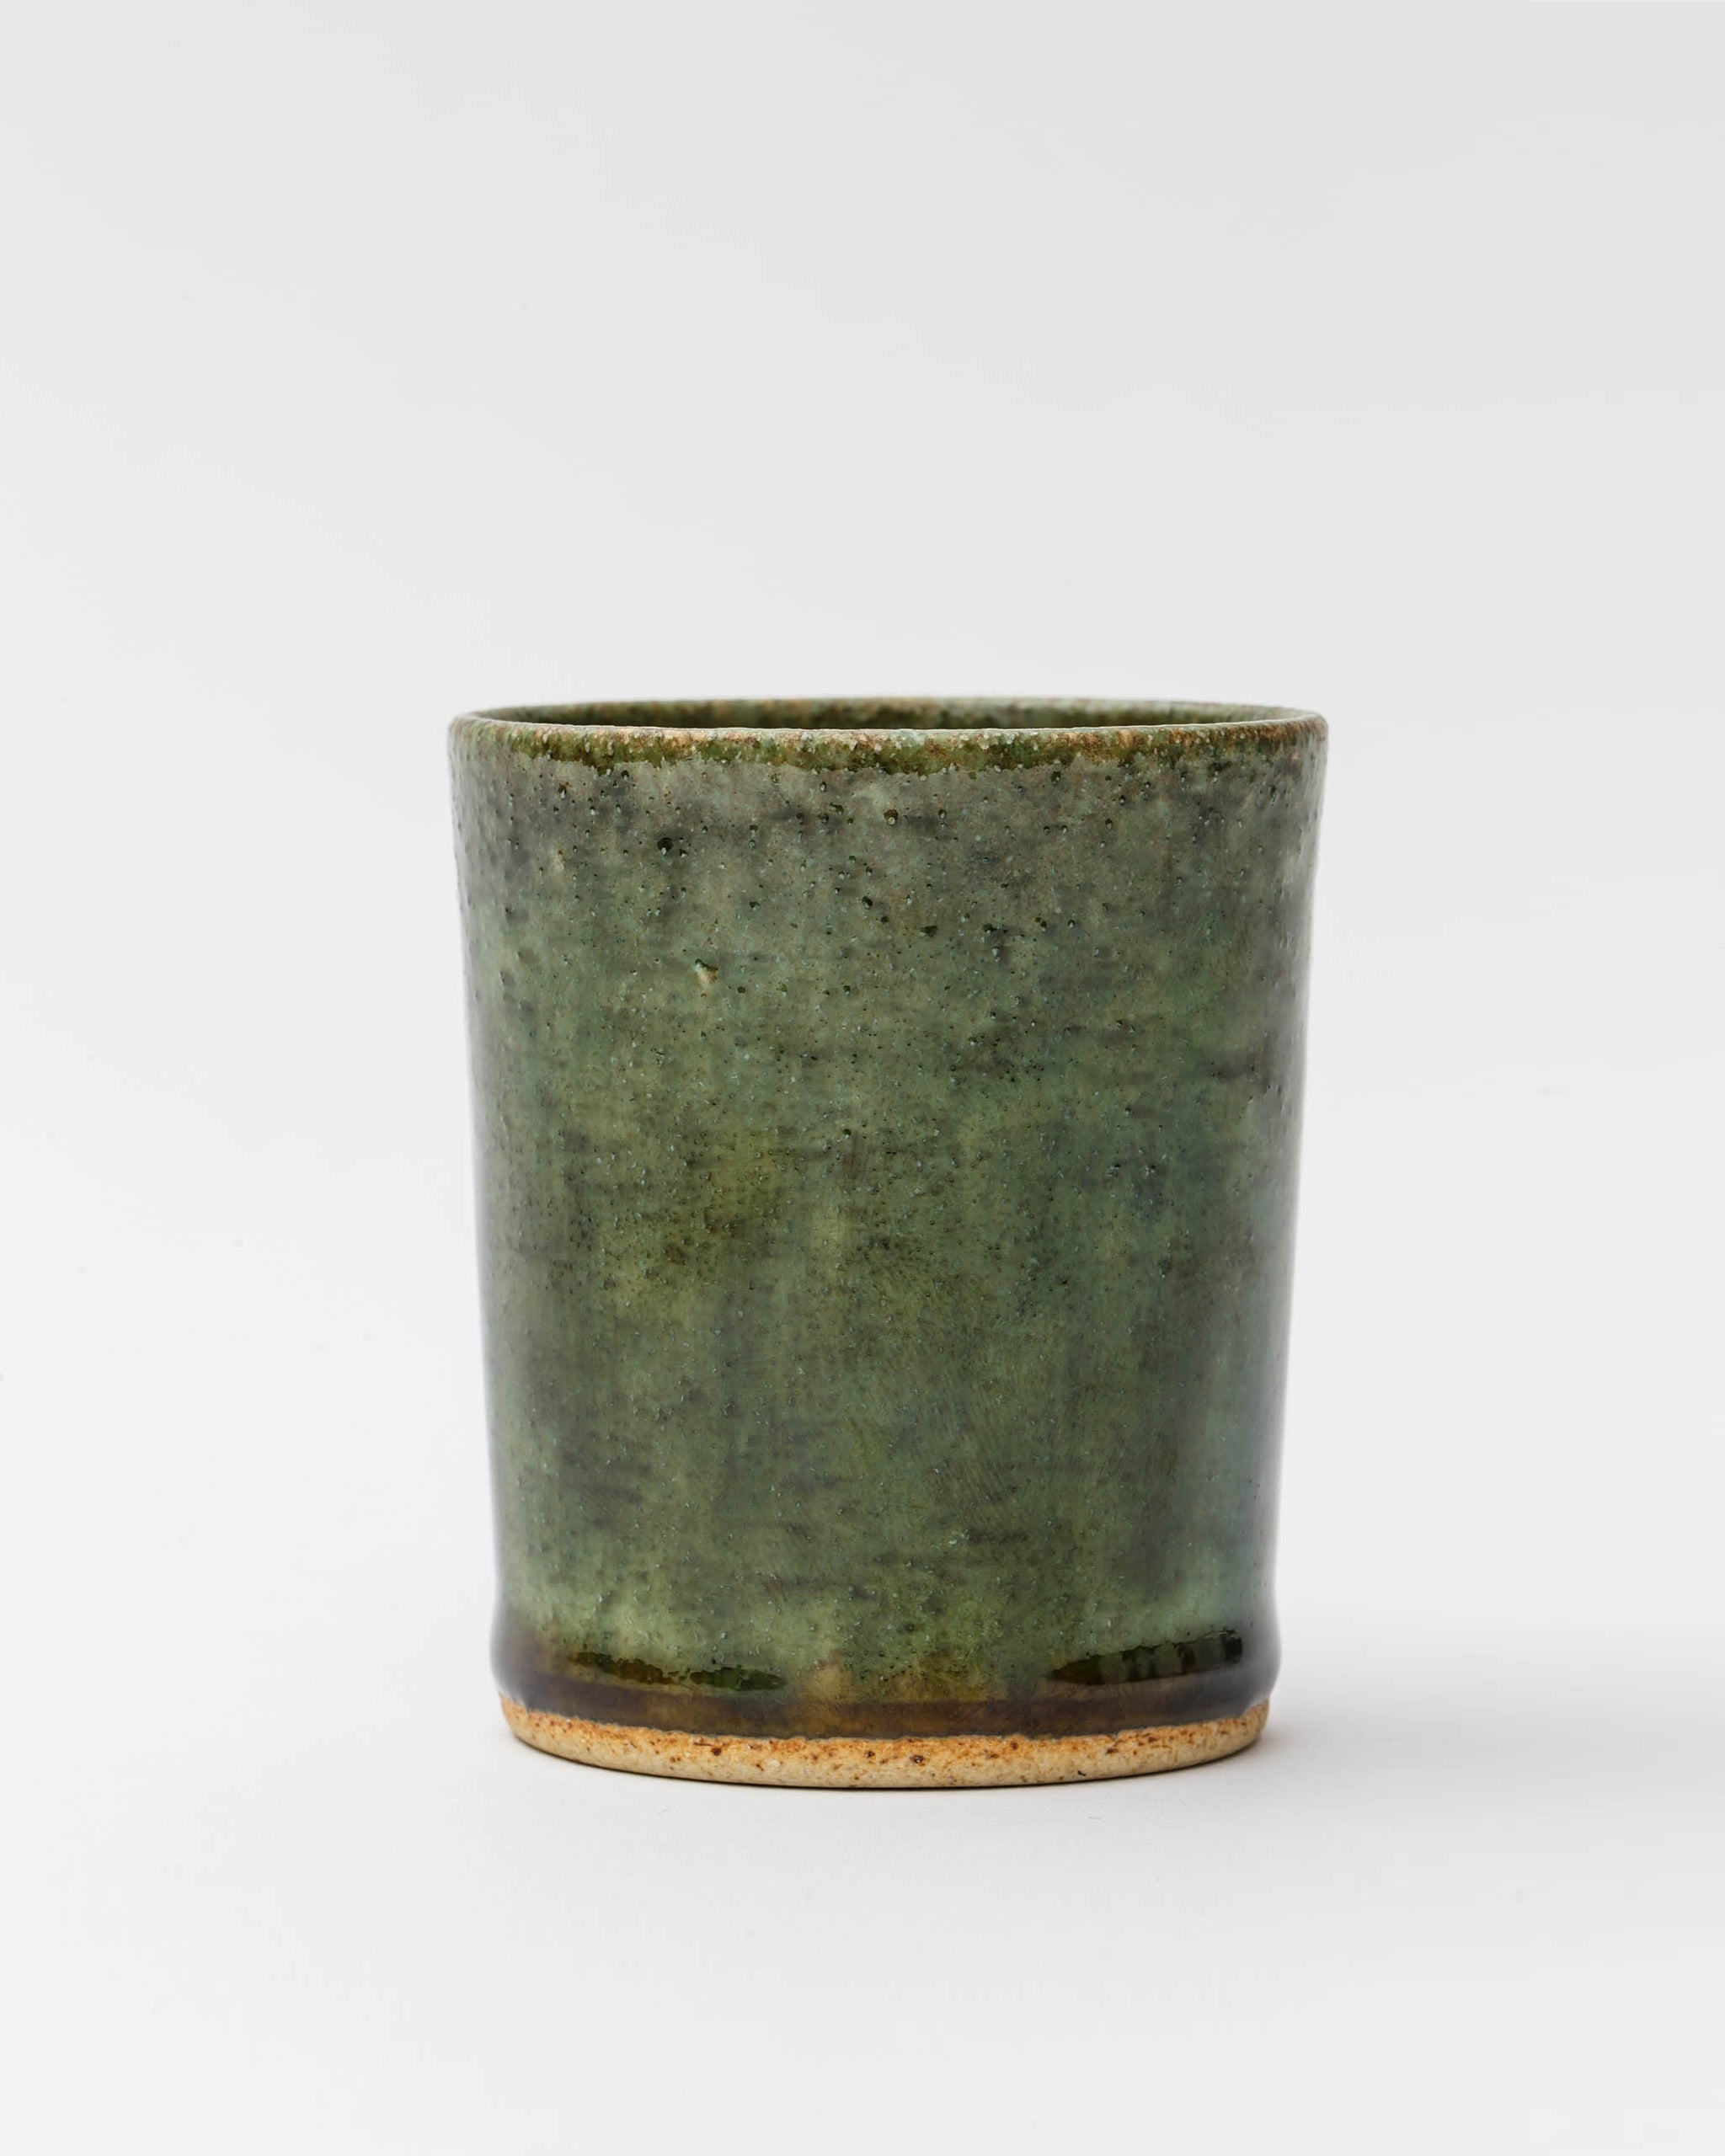 Silhouetted image of ceramic oribe drinking vessel with deep green glaze by Time and Style against white-gray background.